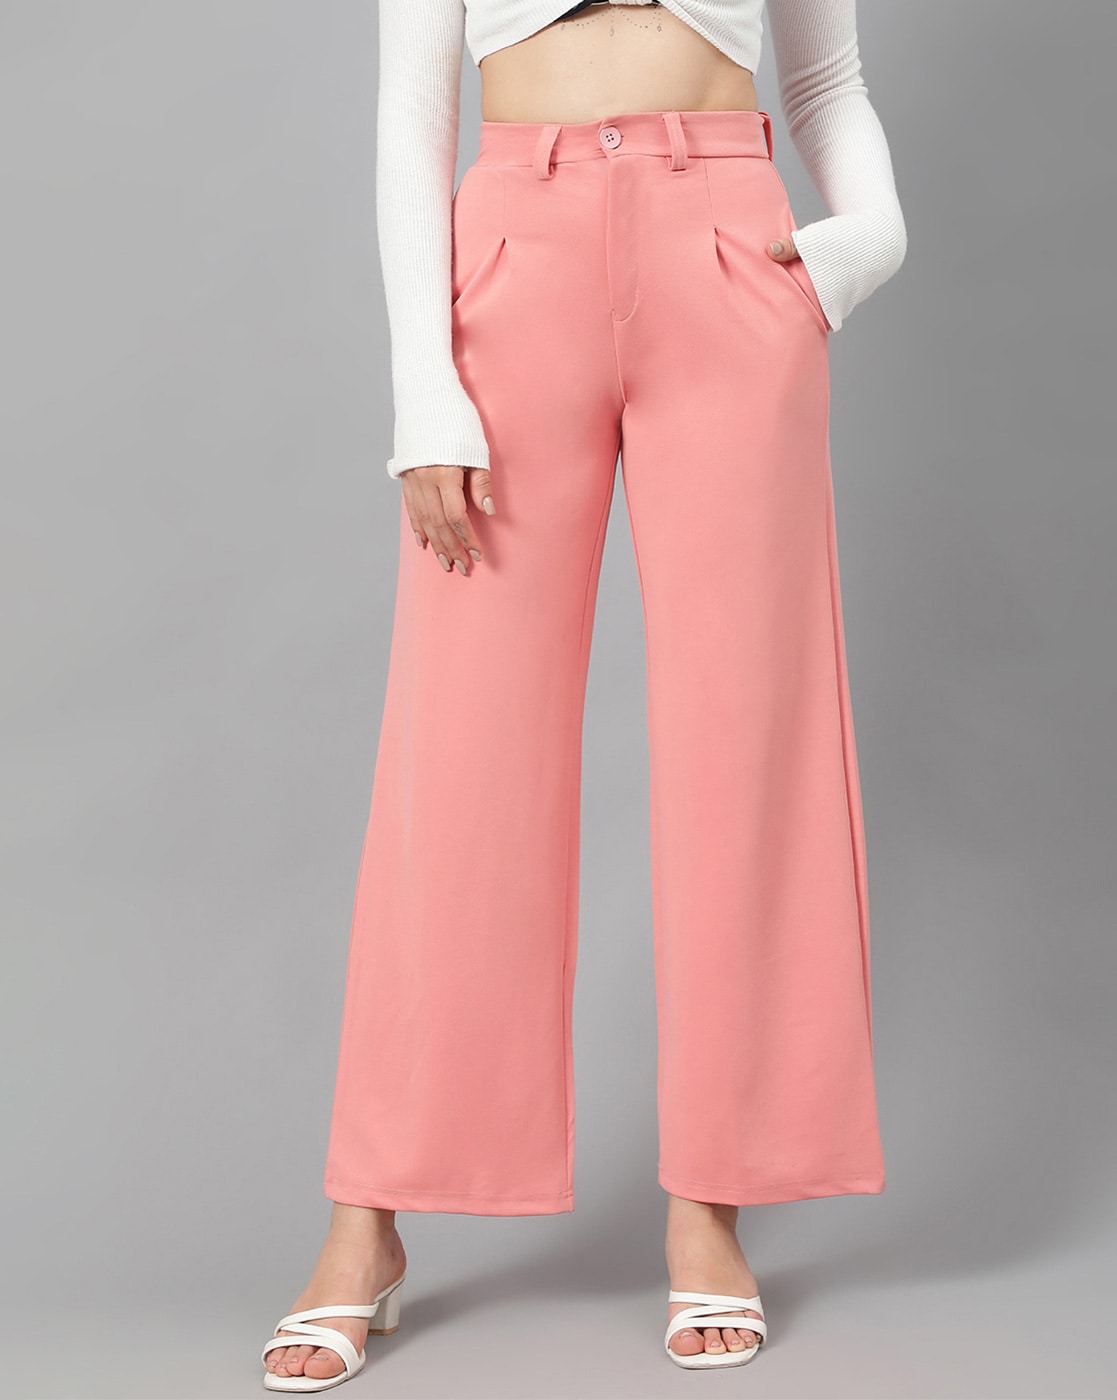 Buy Hot Pink High Waist Trousers for Tall Women, Wide Leg Pants, Pink Wide  Leg Pants, Palazzo Pants for Women, Office Pants Womens Online in India -  Etsy